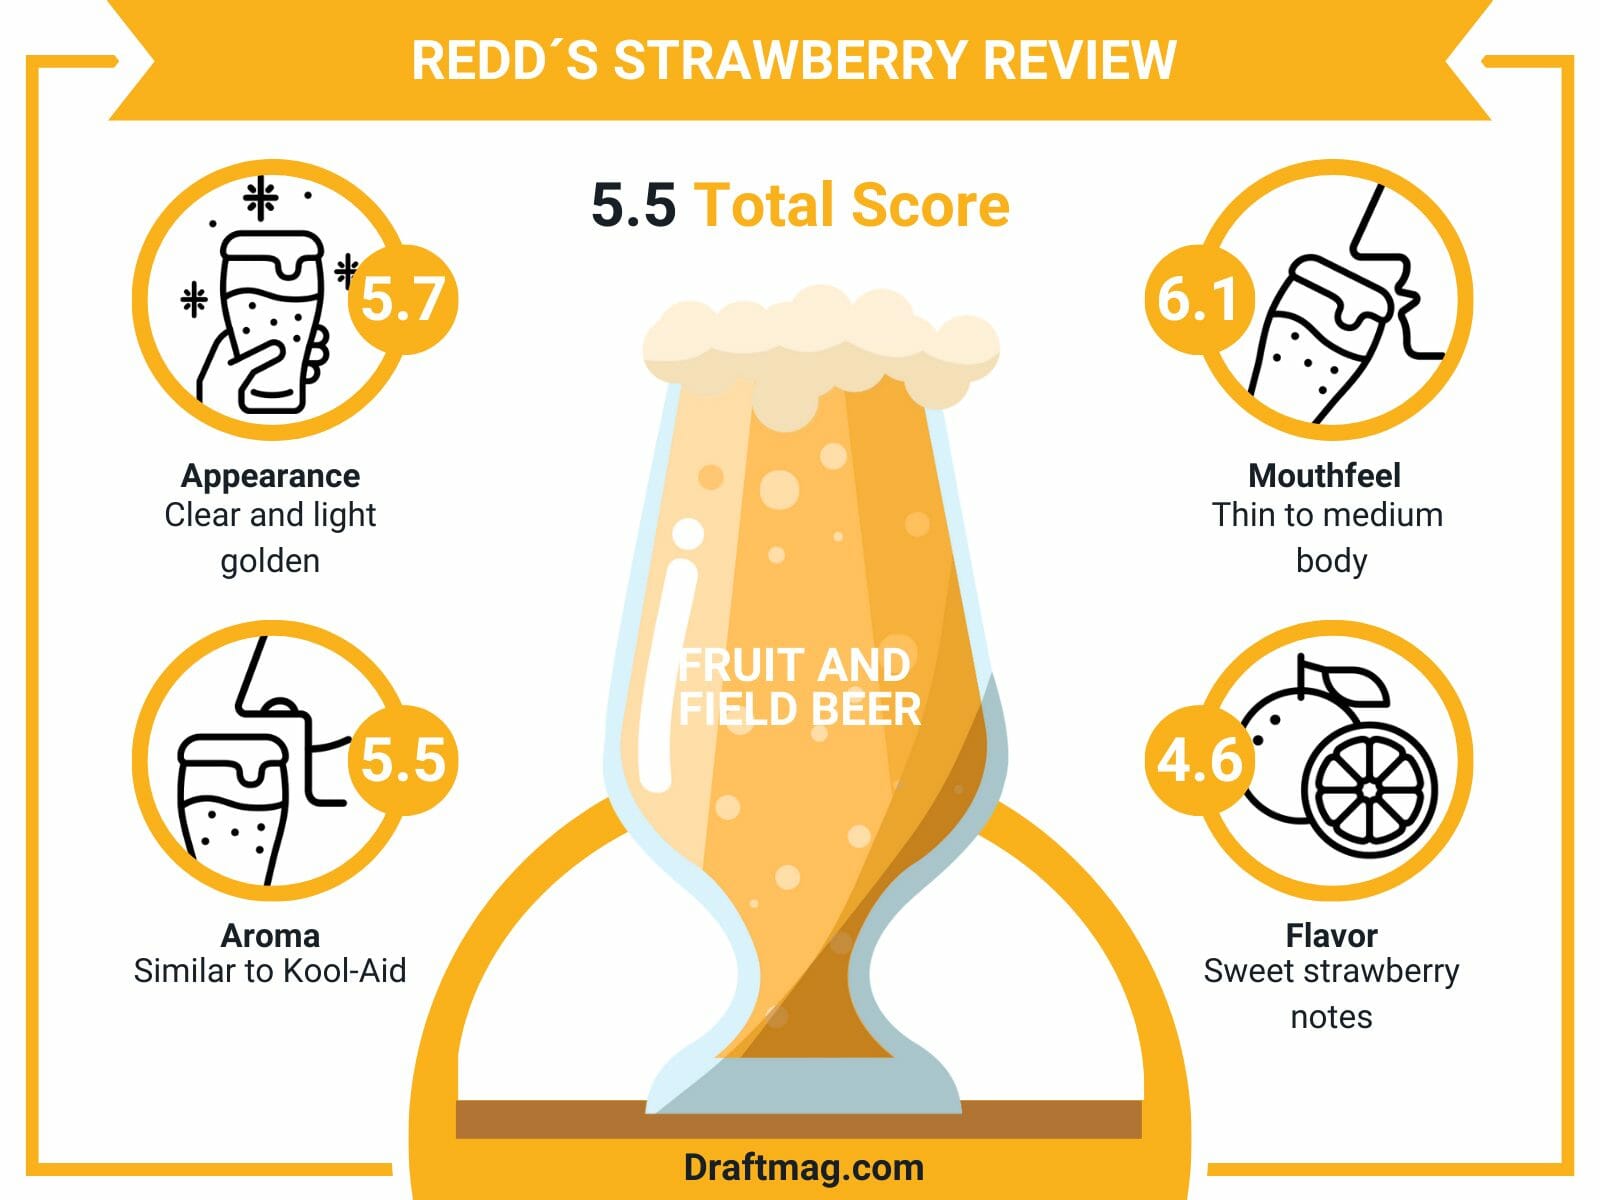 Redd´s strawberry review infographic